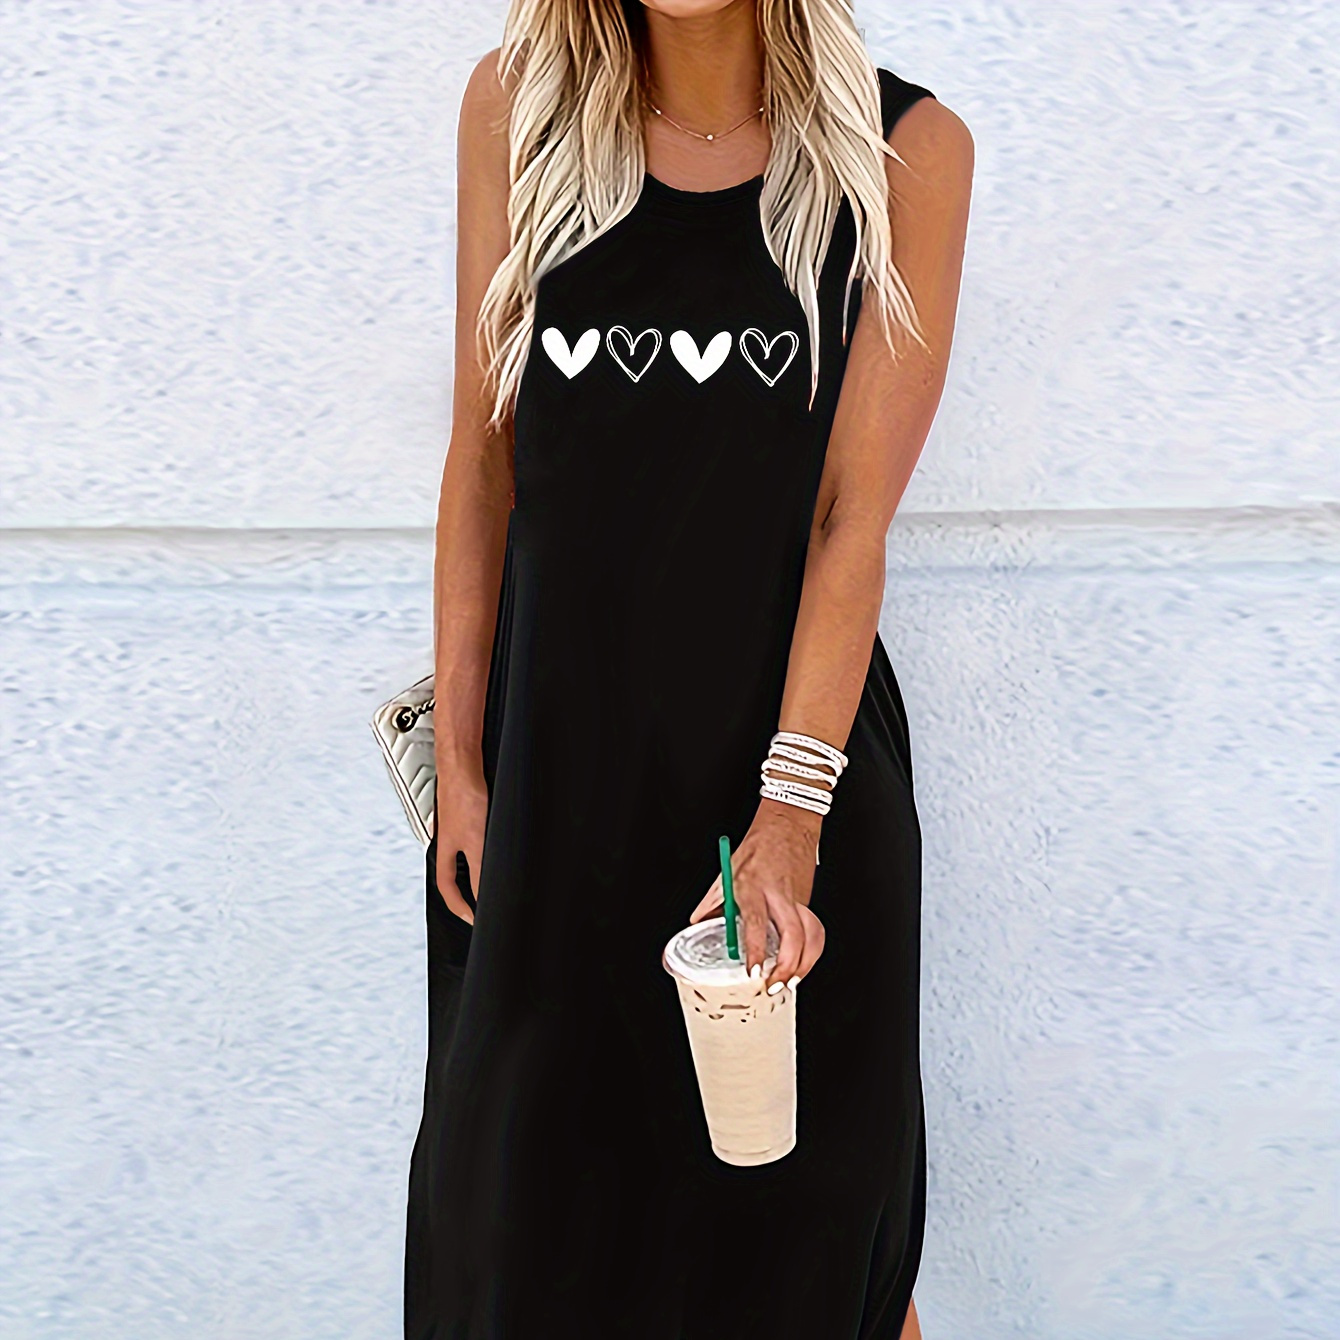 

Casual Polyester-spandex Knit Maxi Dress With Heart Print, Crew Neck Sleeveless Tank Top Style, Long Length With Side Slit Detail - Summer Fashion Vest Dresses For Women